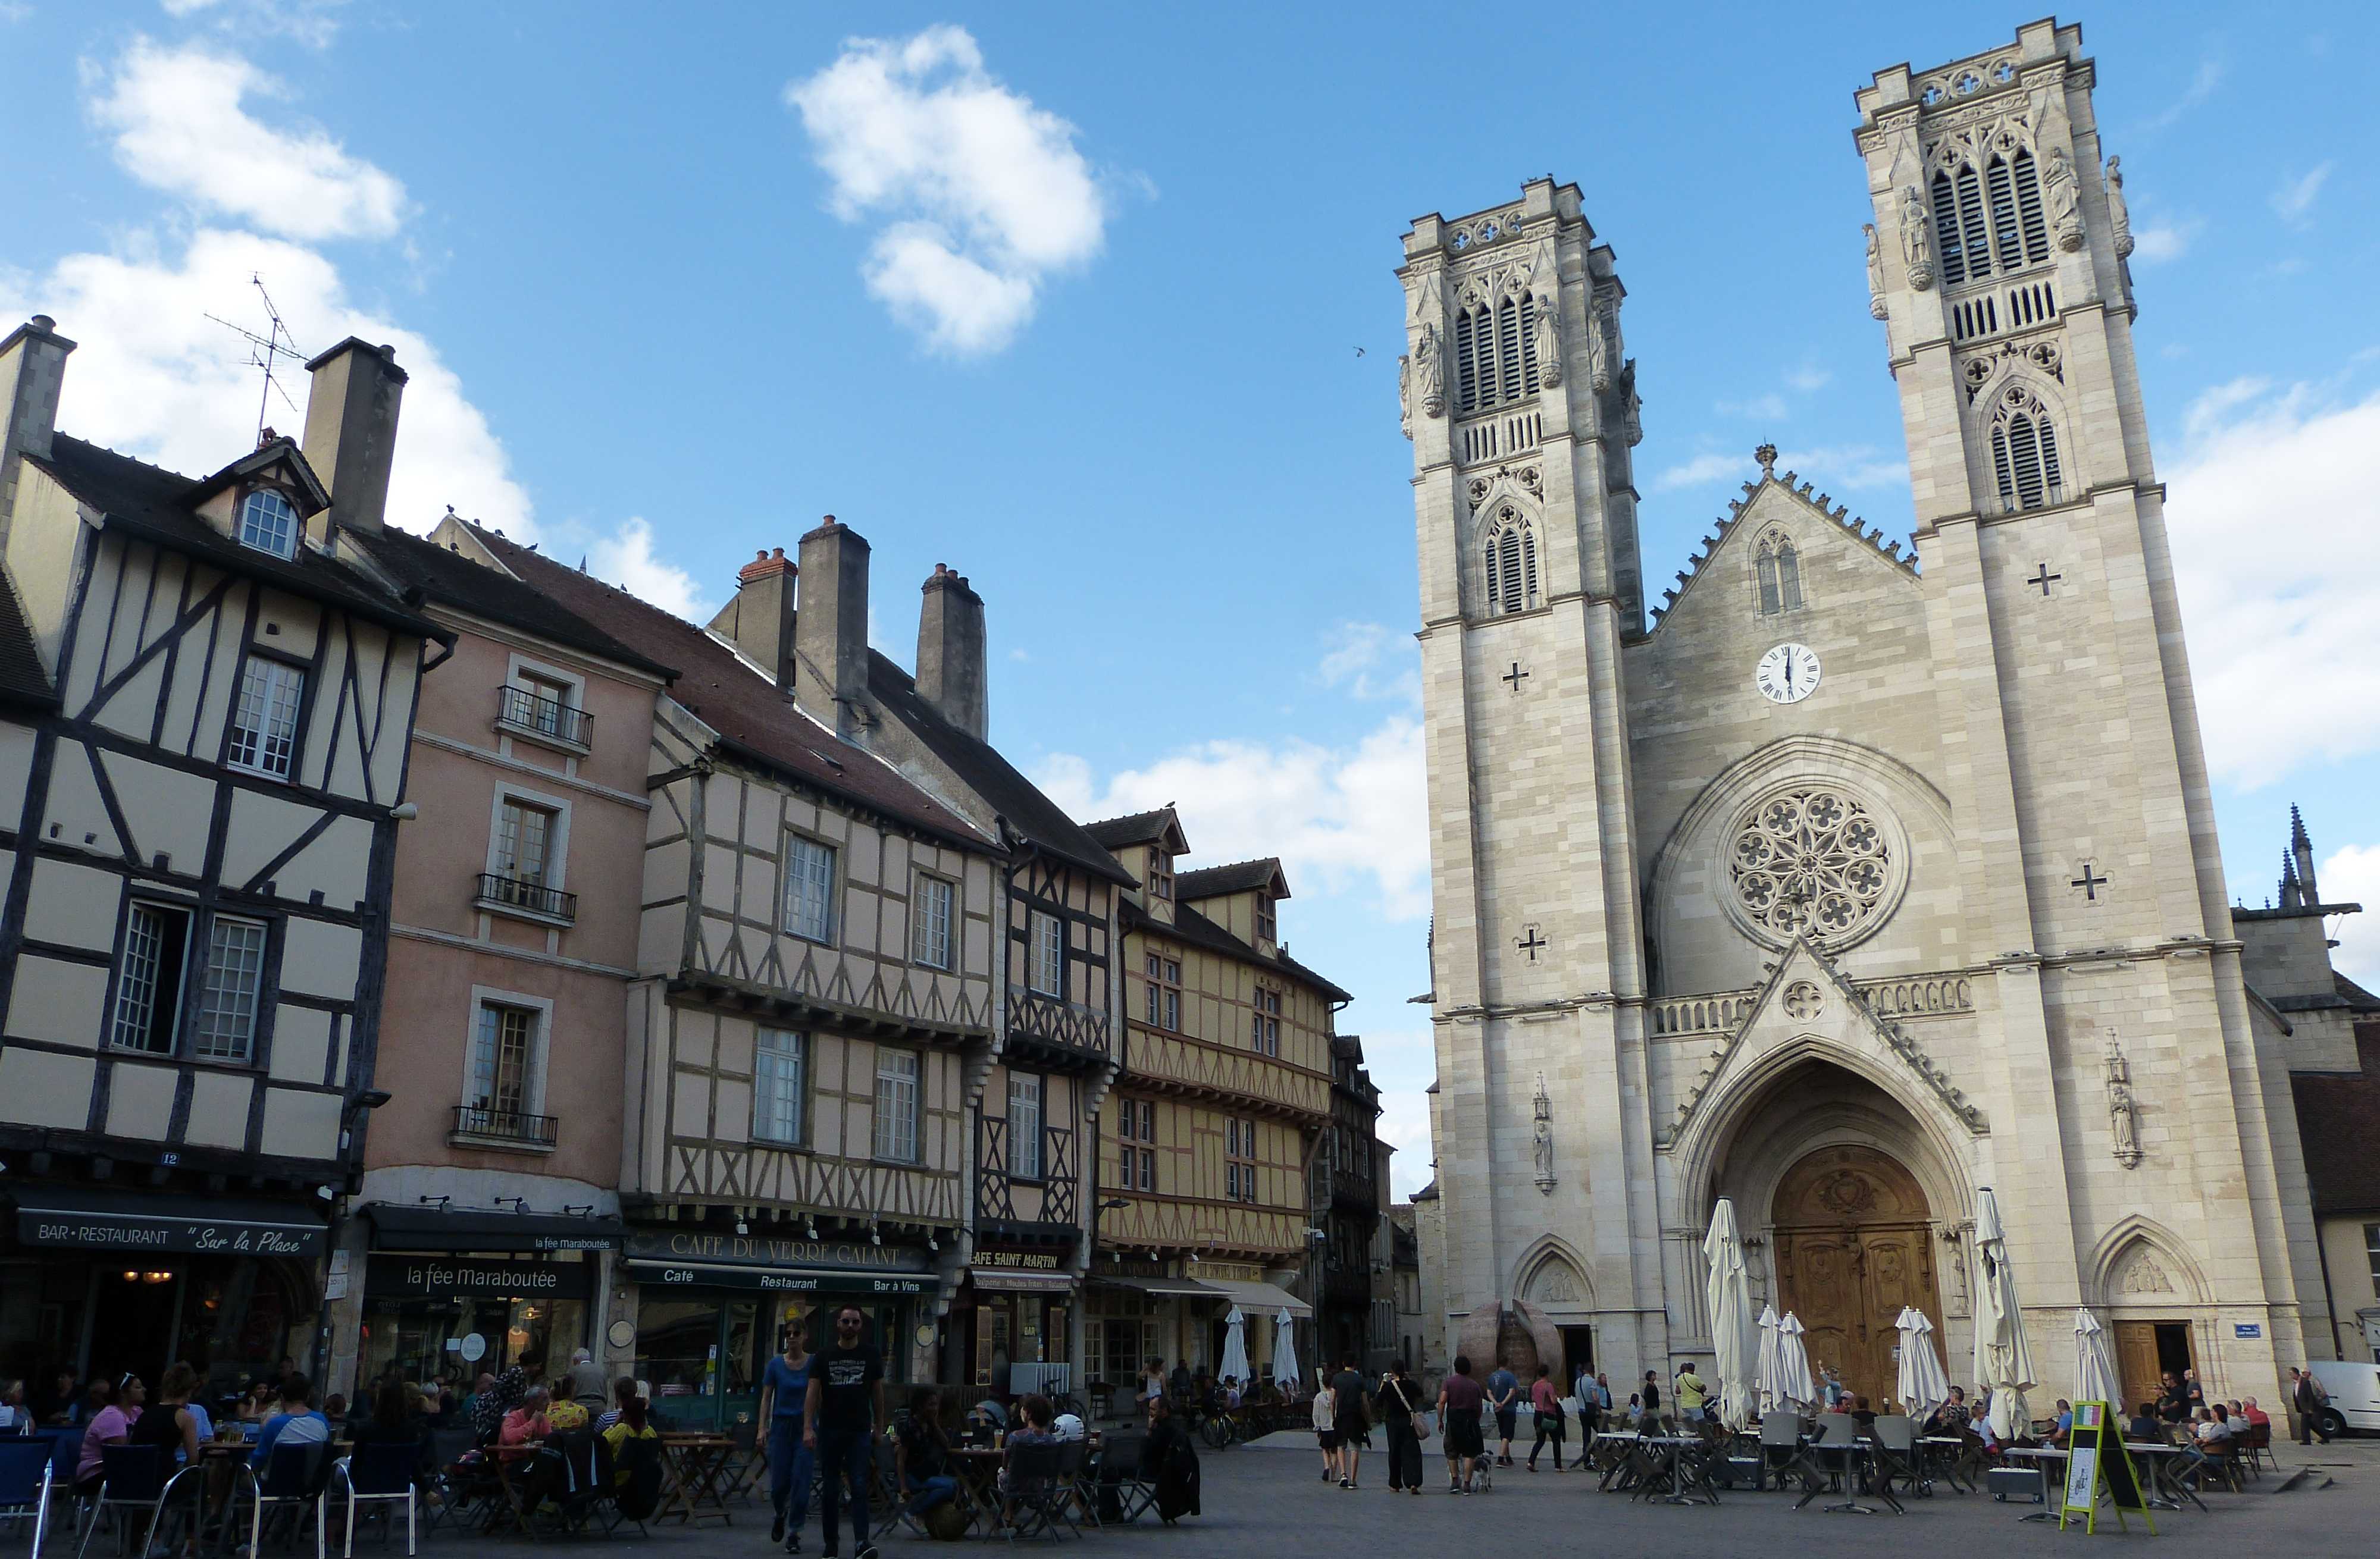 The main square in Chalon-sur-Saône with its cathedral